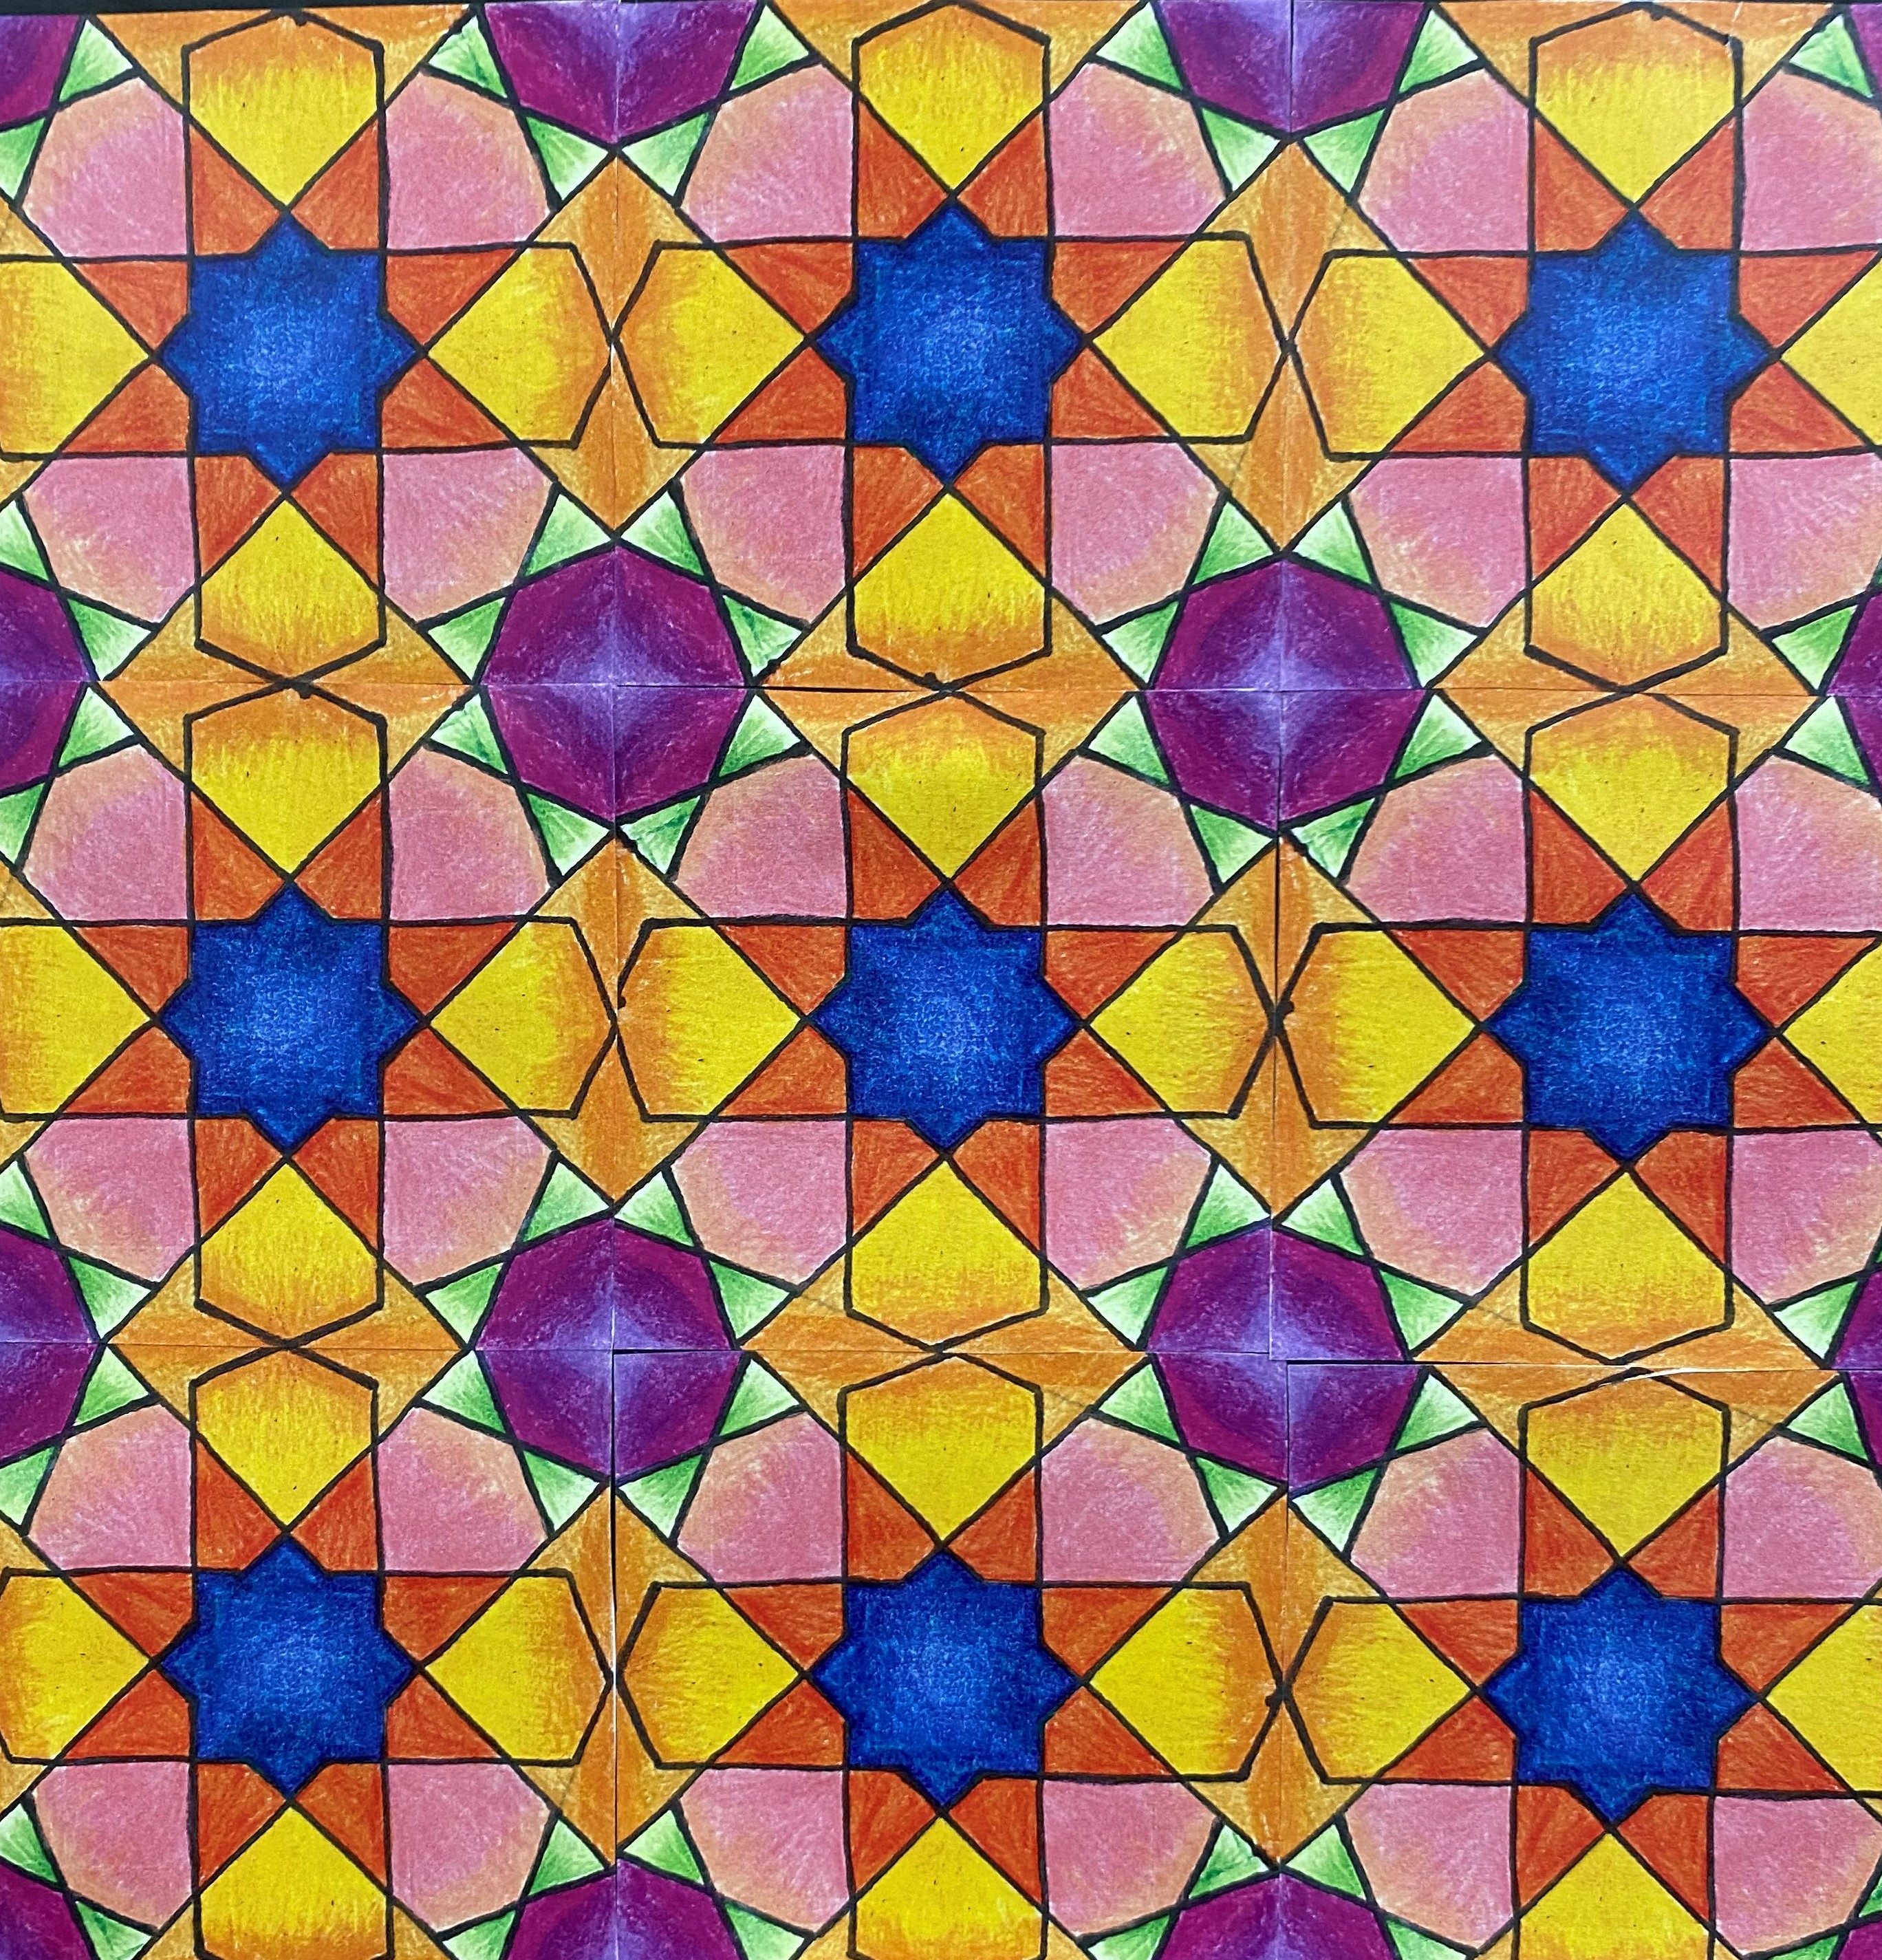 Tile design by Fareed Pirzada